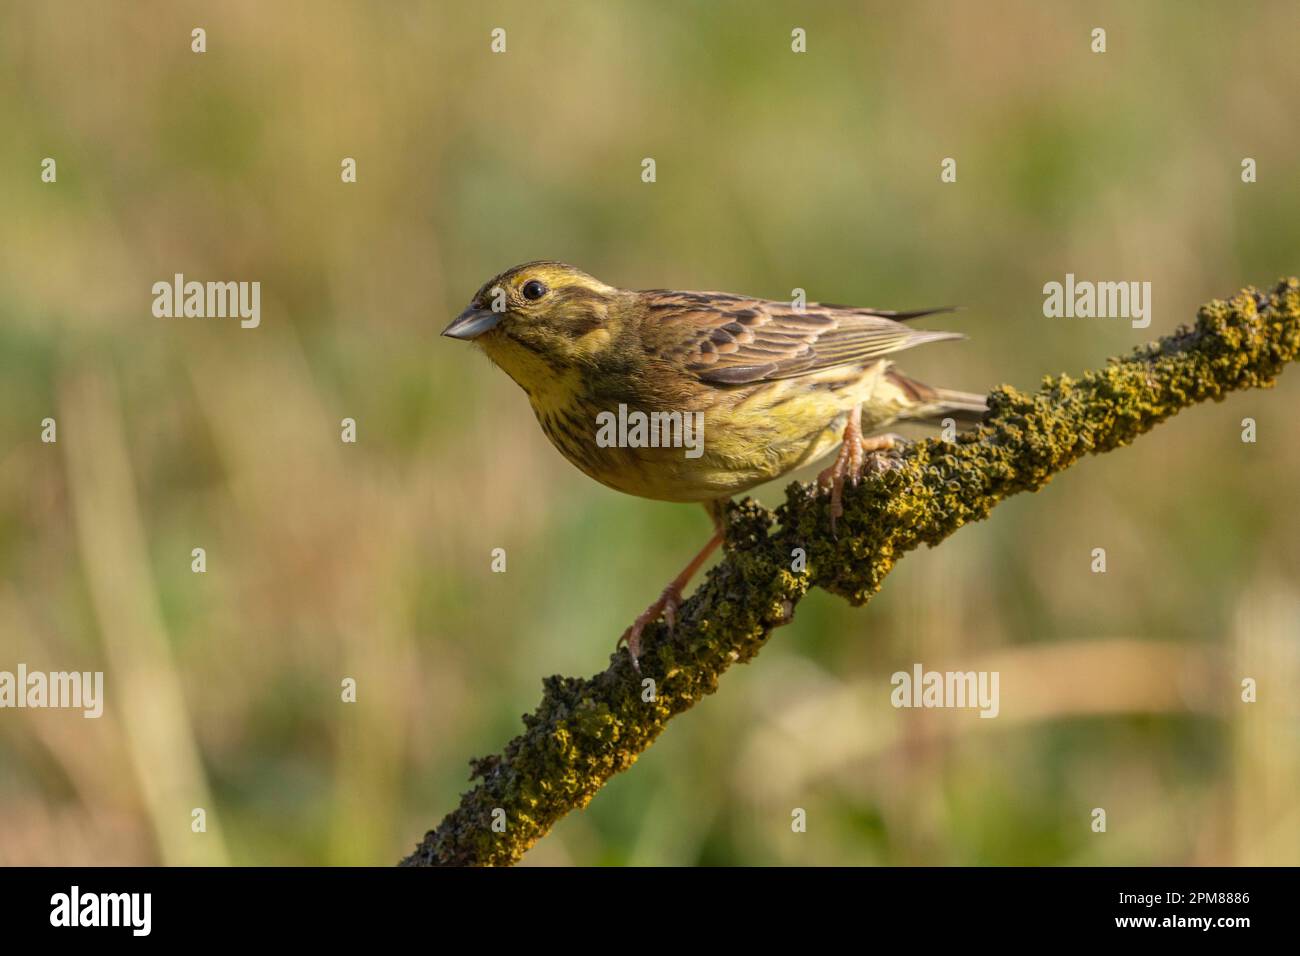 France, Aude, Yellowhammer (Emberiza citrinella), adult female, on a branch Stock Photo